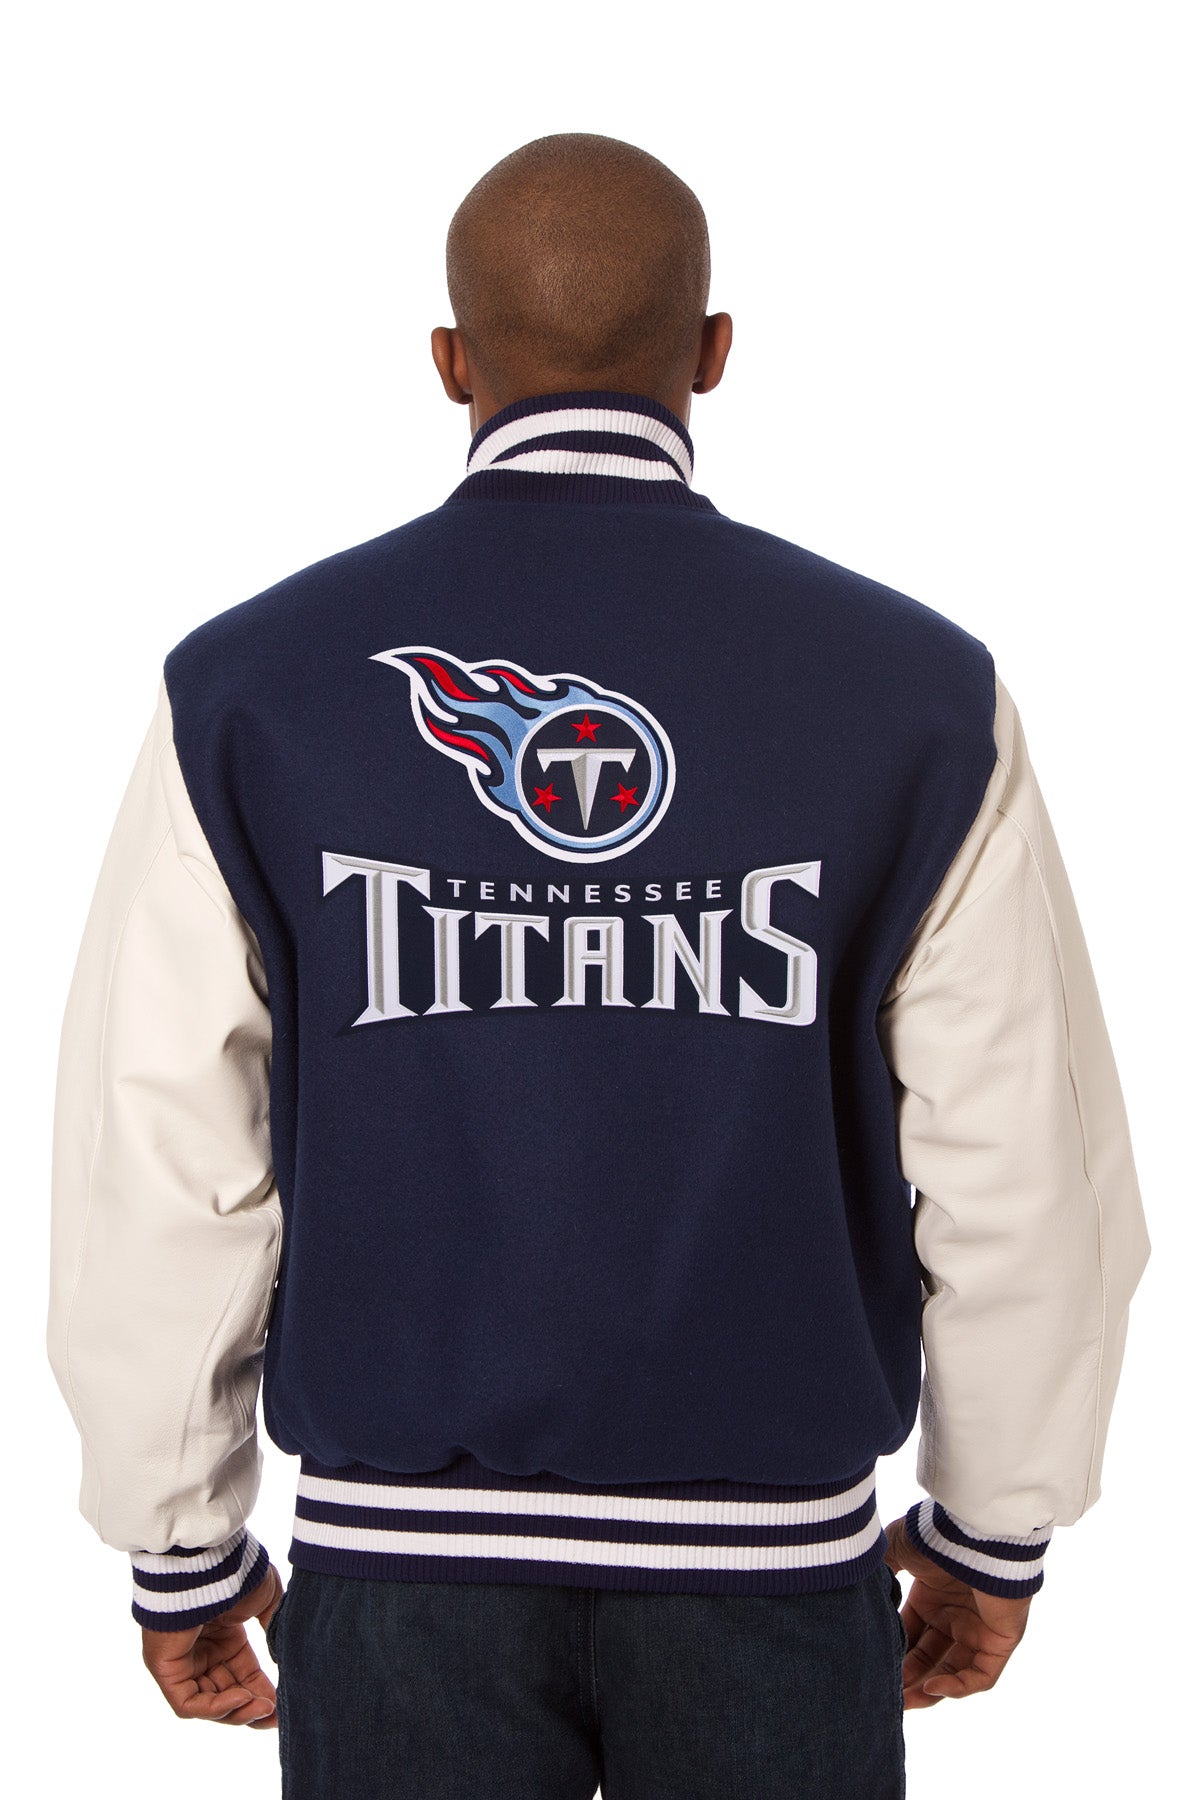 Tennessee Titans Embroidered Wool and Leather Jacket